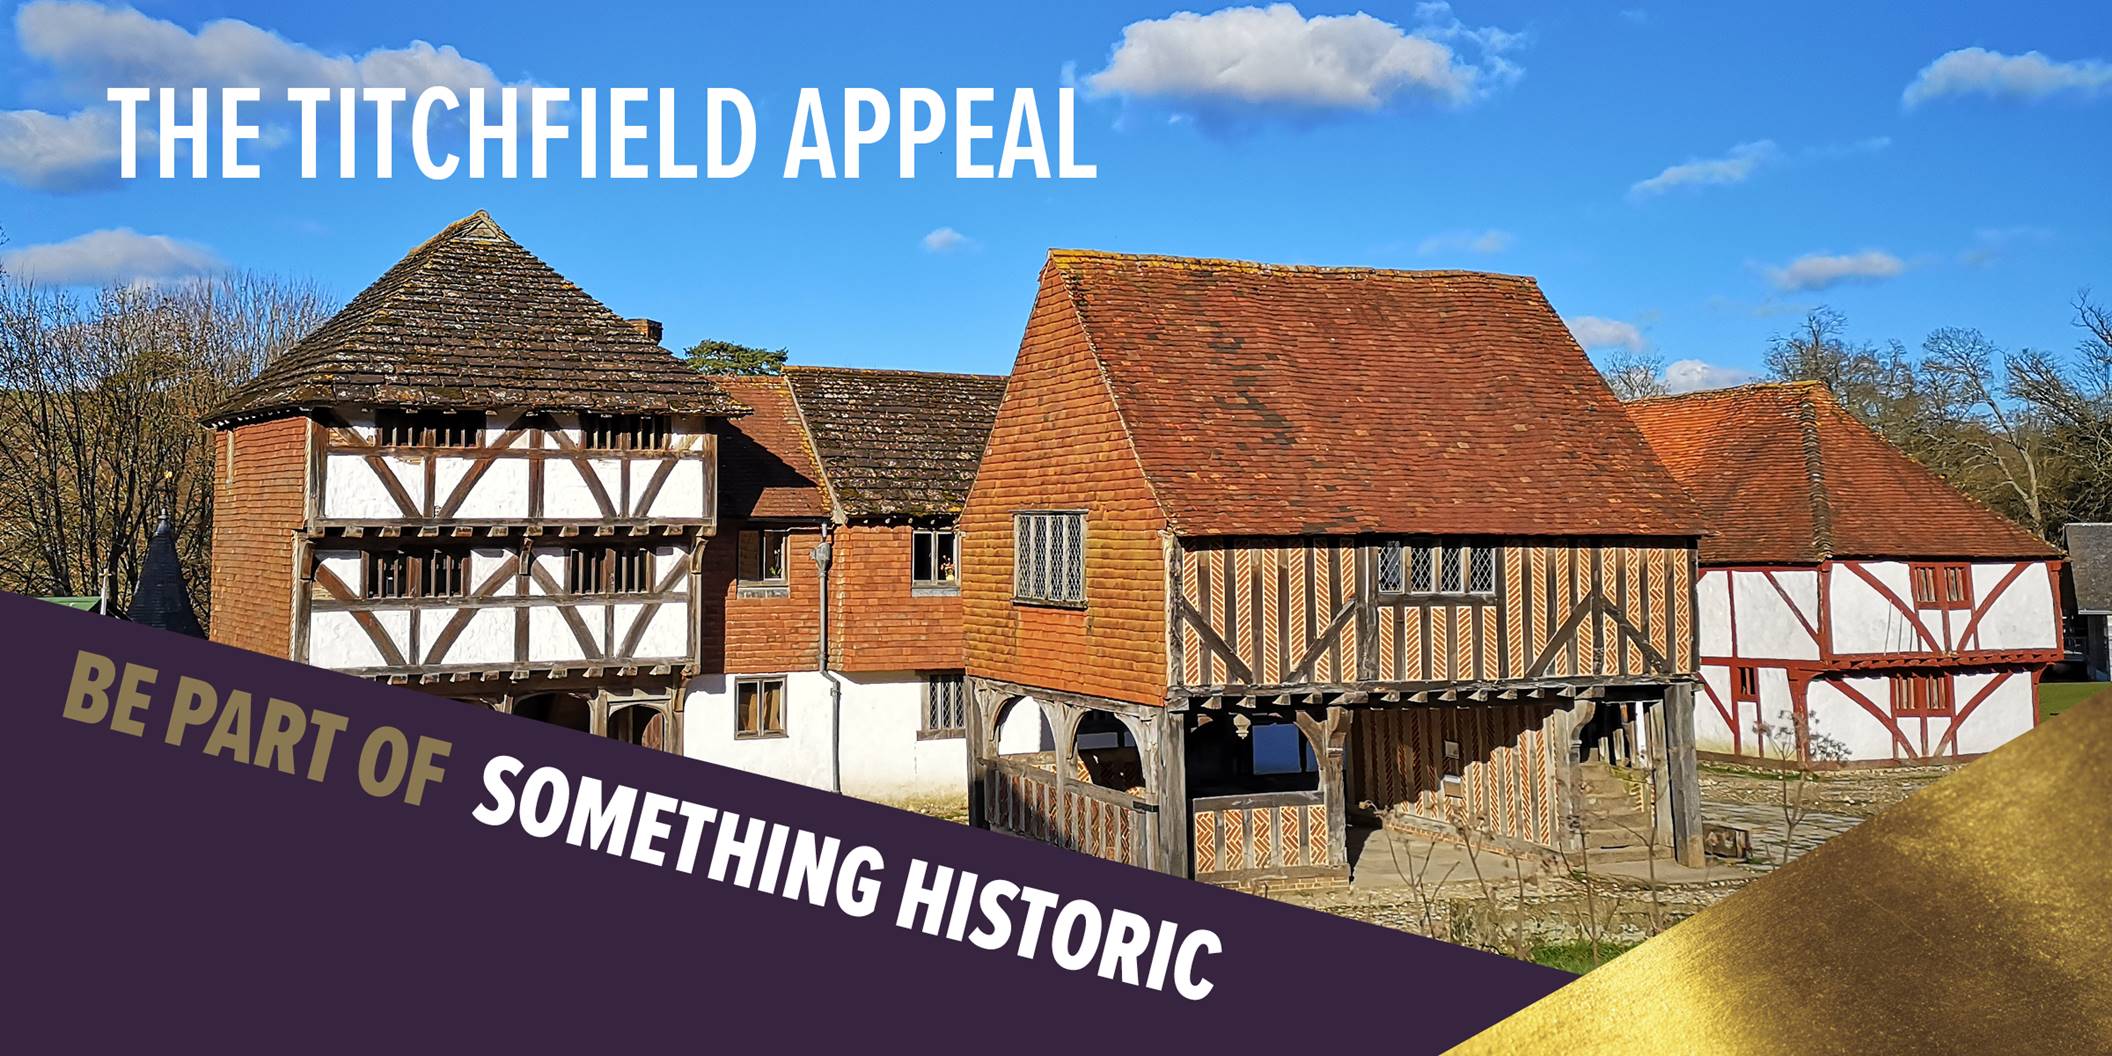 The titchfield appeal